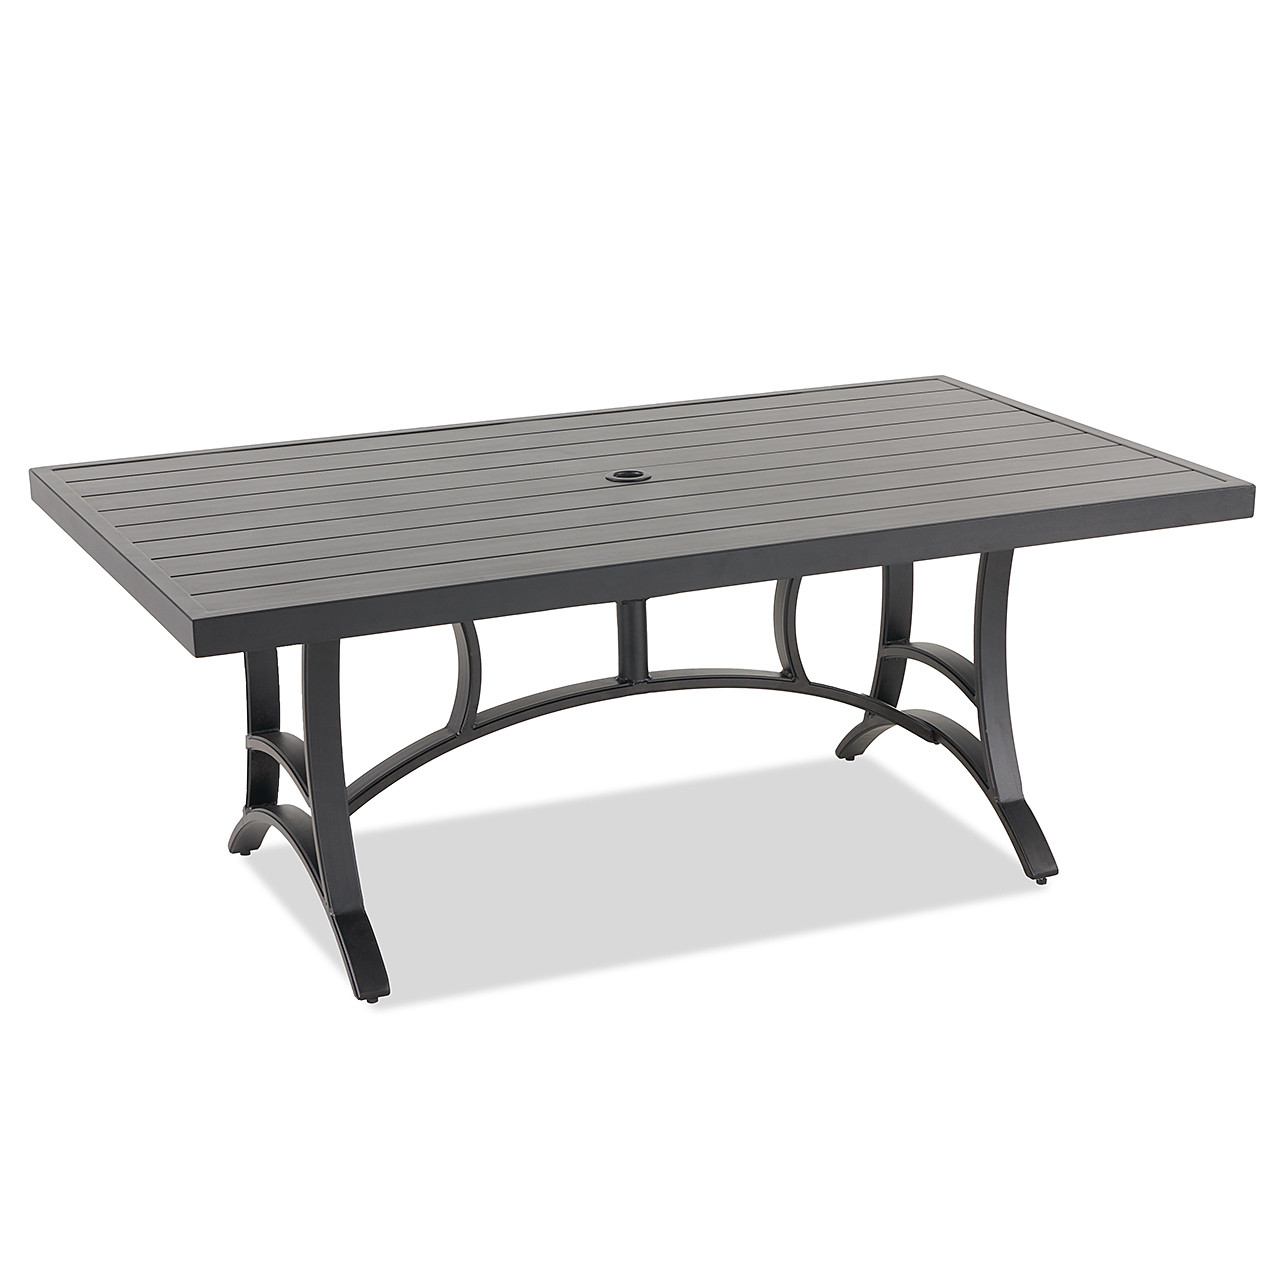 Hill Country Aged Bronze Aluminum 72 x 42 in. Dining Table